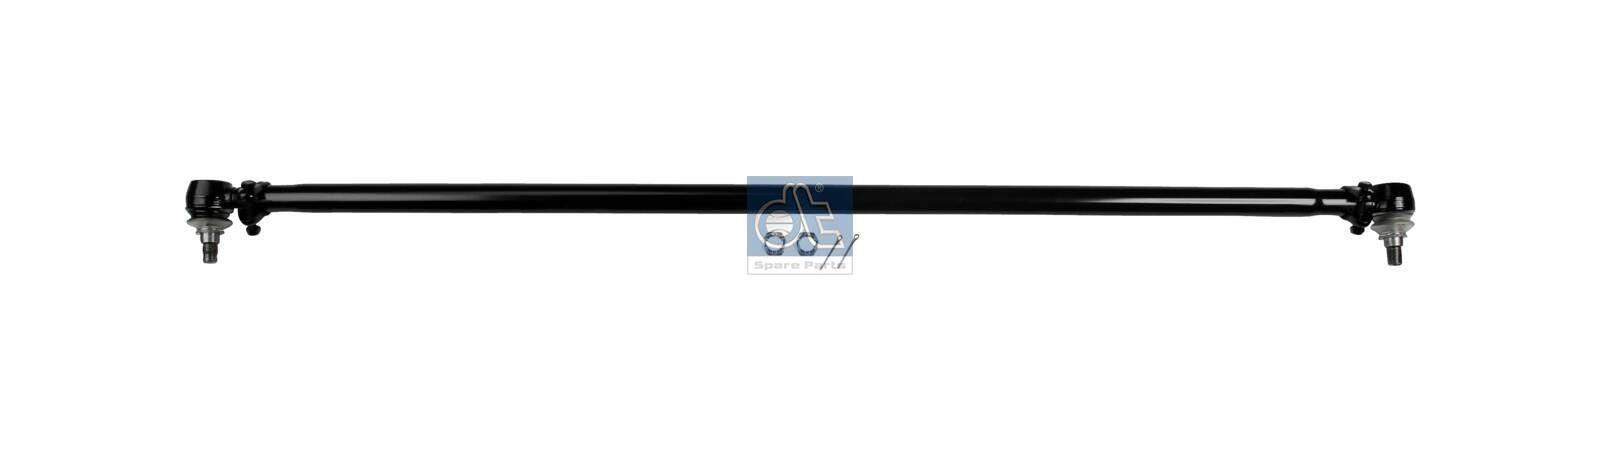 DT Spare Parts Front Axle Cone Size: 26mm, Length: 1546mm Tie Rod 4.64595 buy